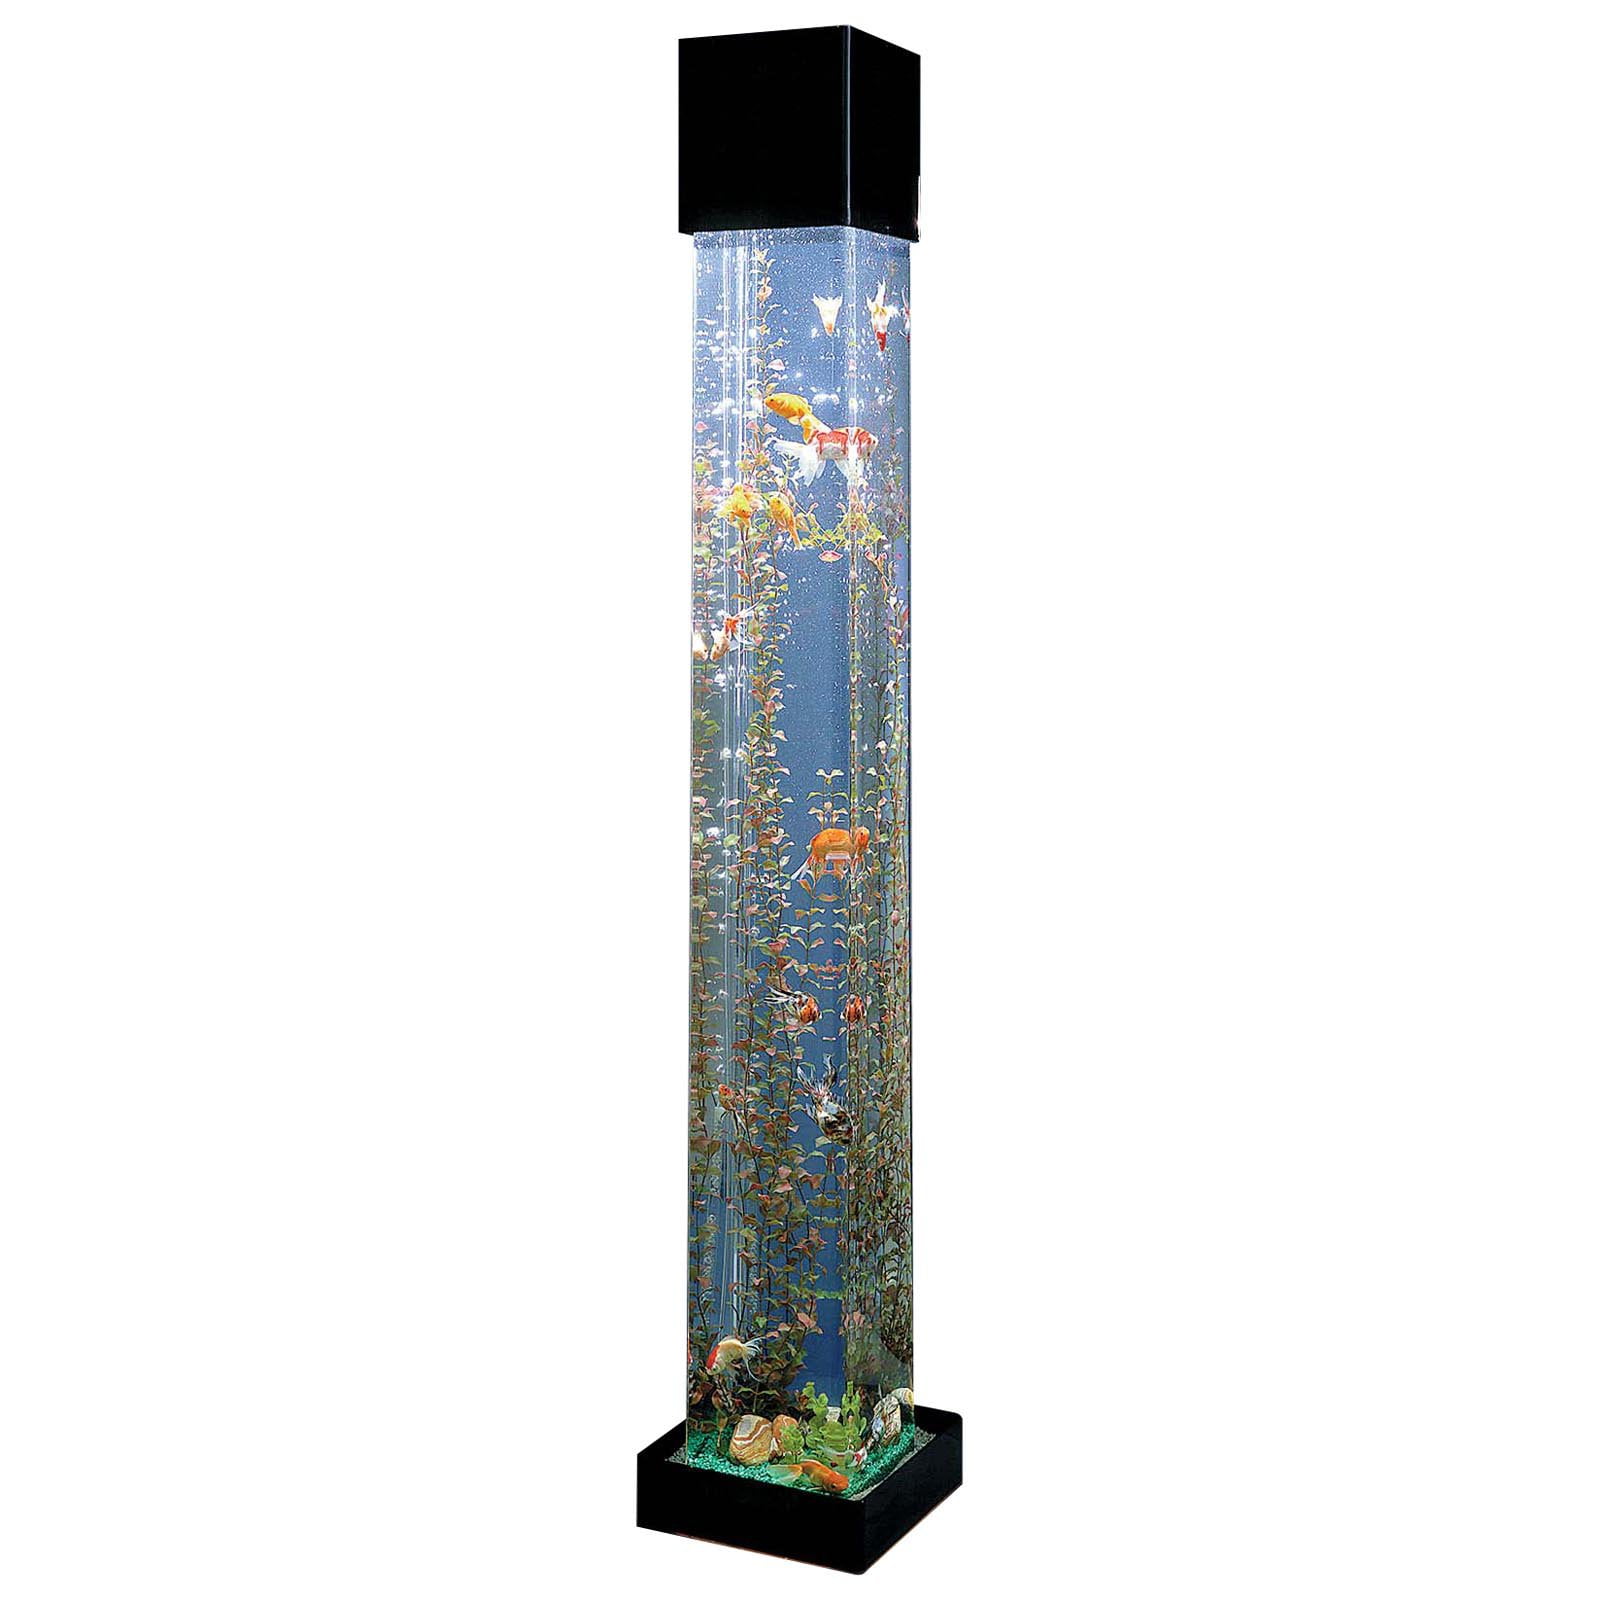 Midwest Tropical S-1000 Square Aqua Tower 